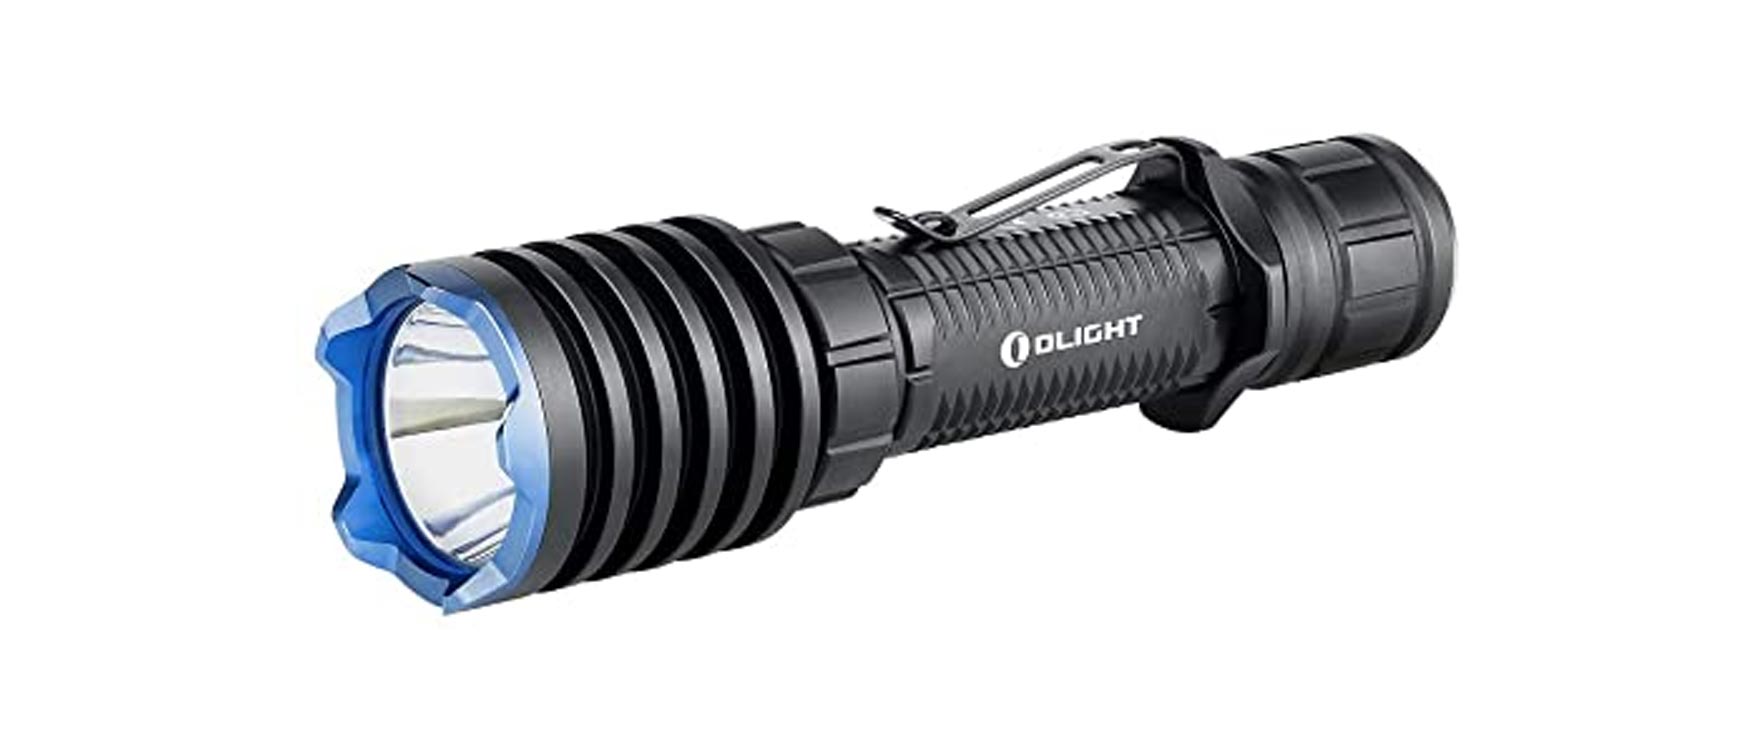 1. OLIGHT Warrior X Pro 2100 Lumens USB Magnetic Rechargeable Tactical Flashlight